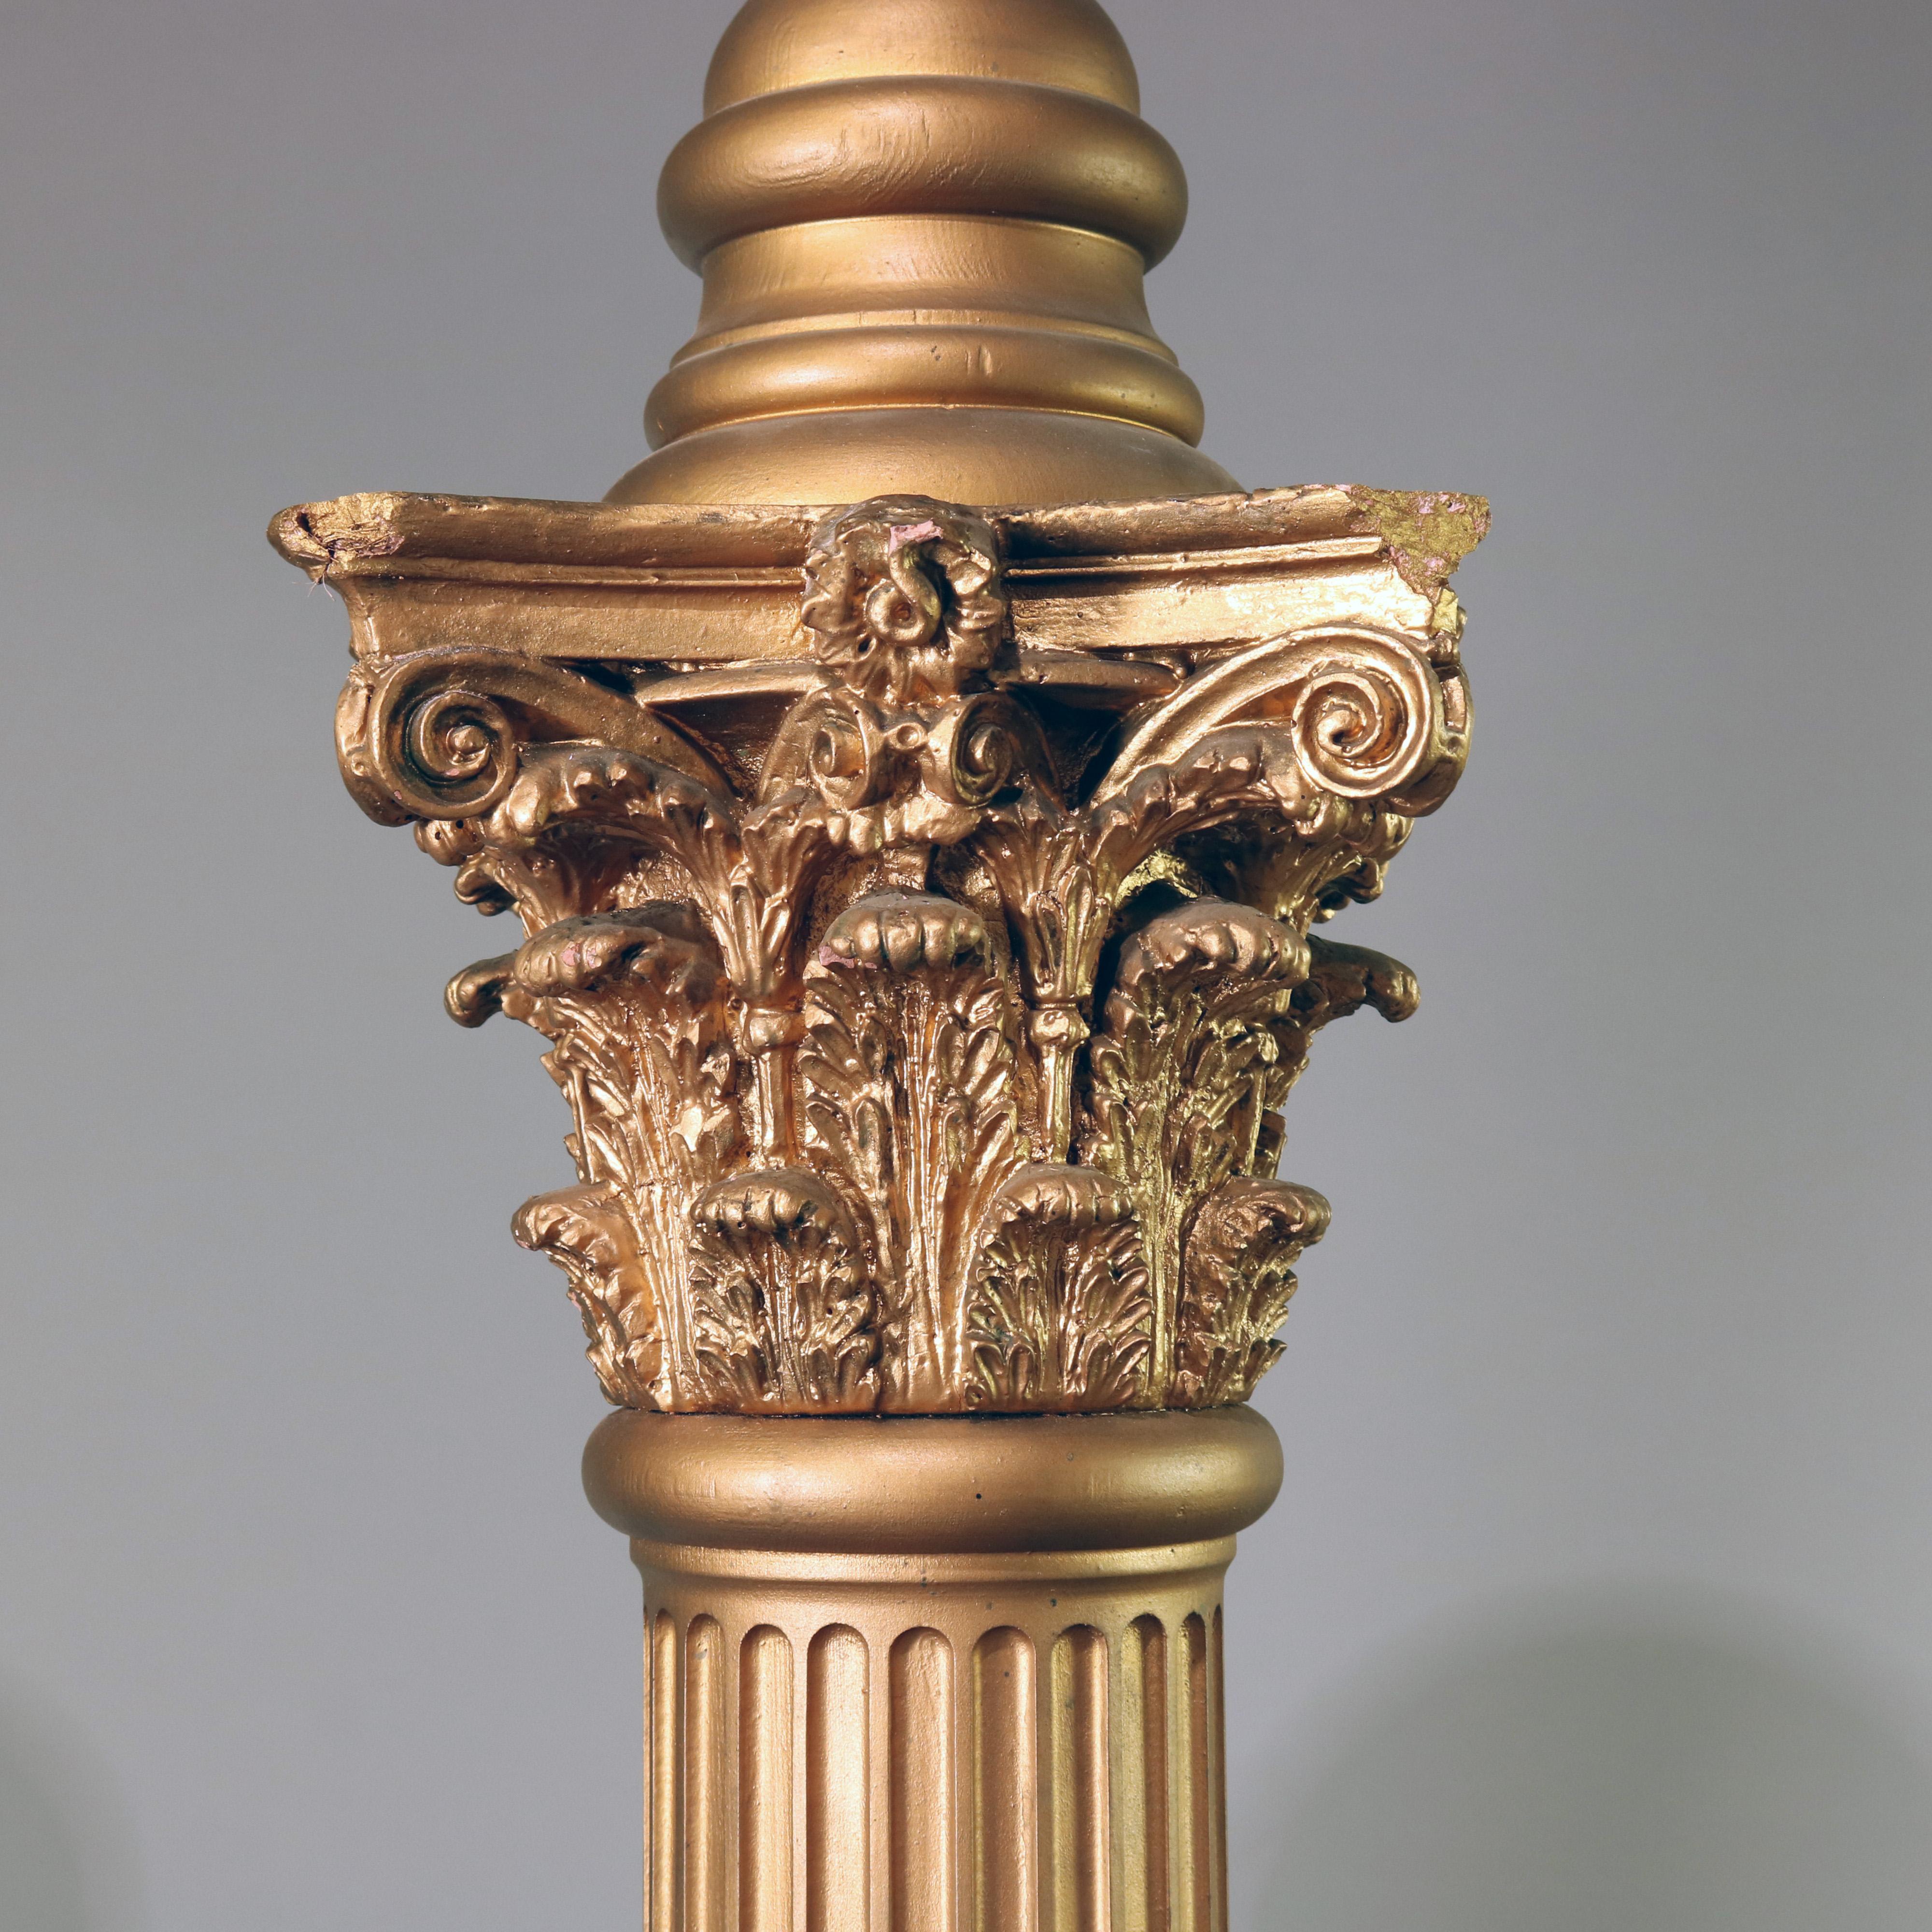 Pair of vintage oversized Masonic Lodge or Knights Templar ceremonial gilt composite Corinthian columns having foliate and scroll capitals and stepped bases with each surmounted by a world globe, 20th century

***DELIVERY NOTICE – Due to COVID-19 we